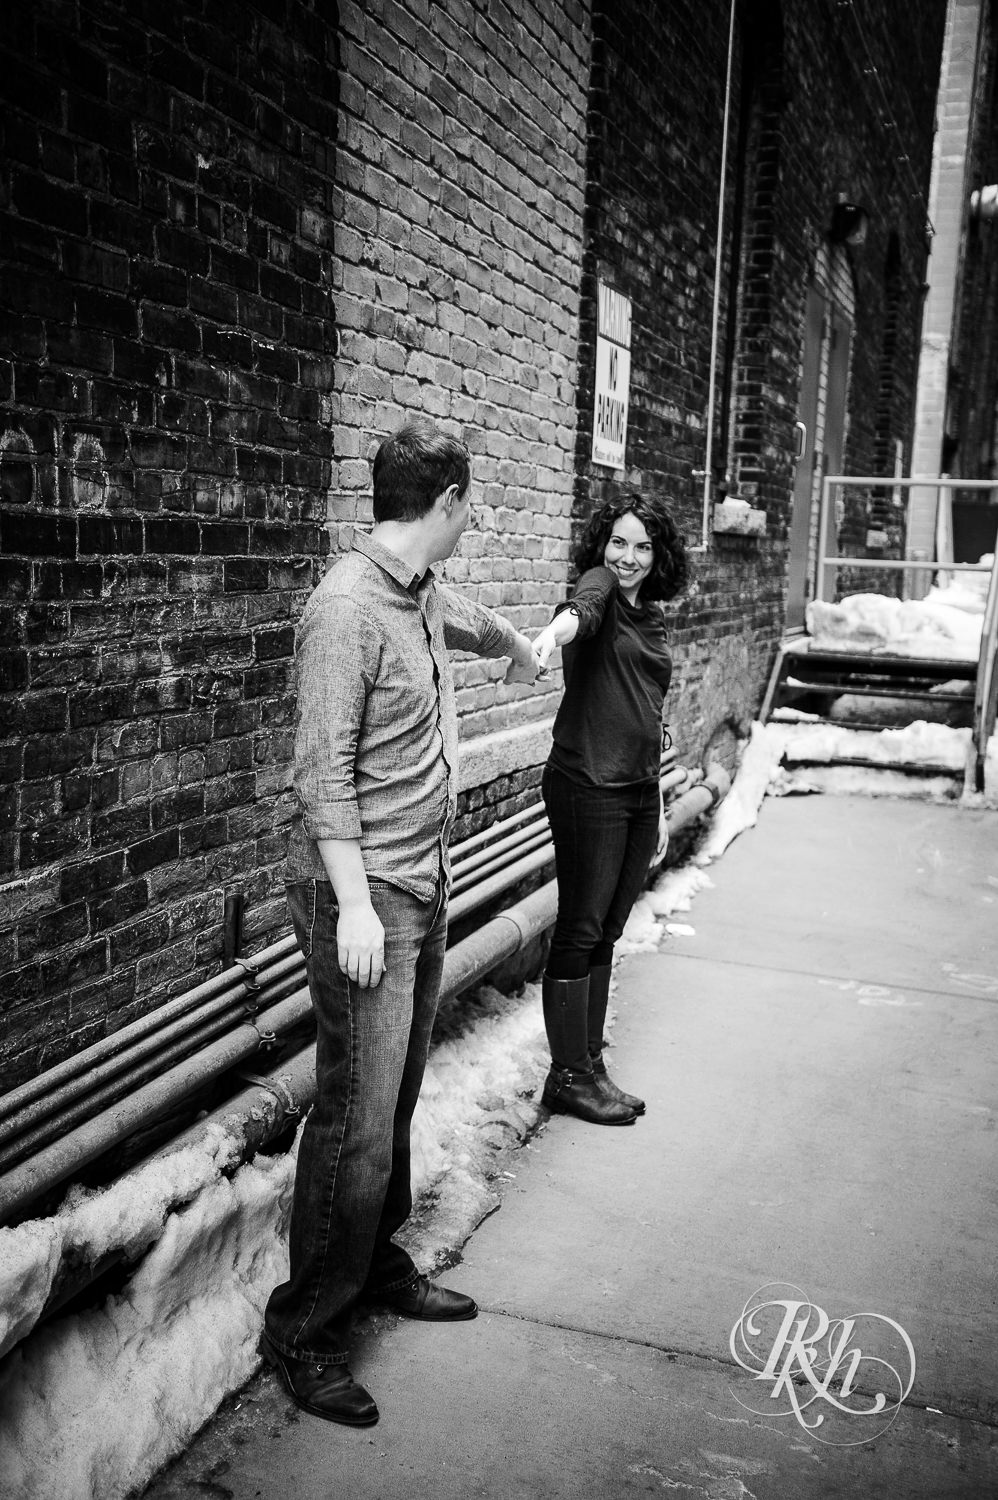 Man and woman smile in front of brick while in Minneapolis, Minnesota.